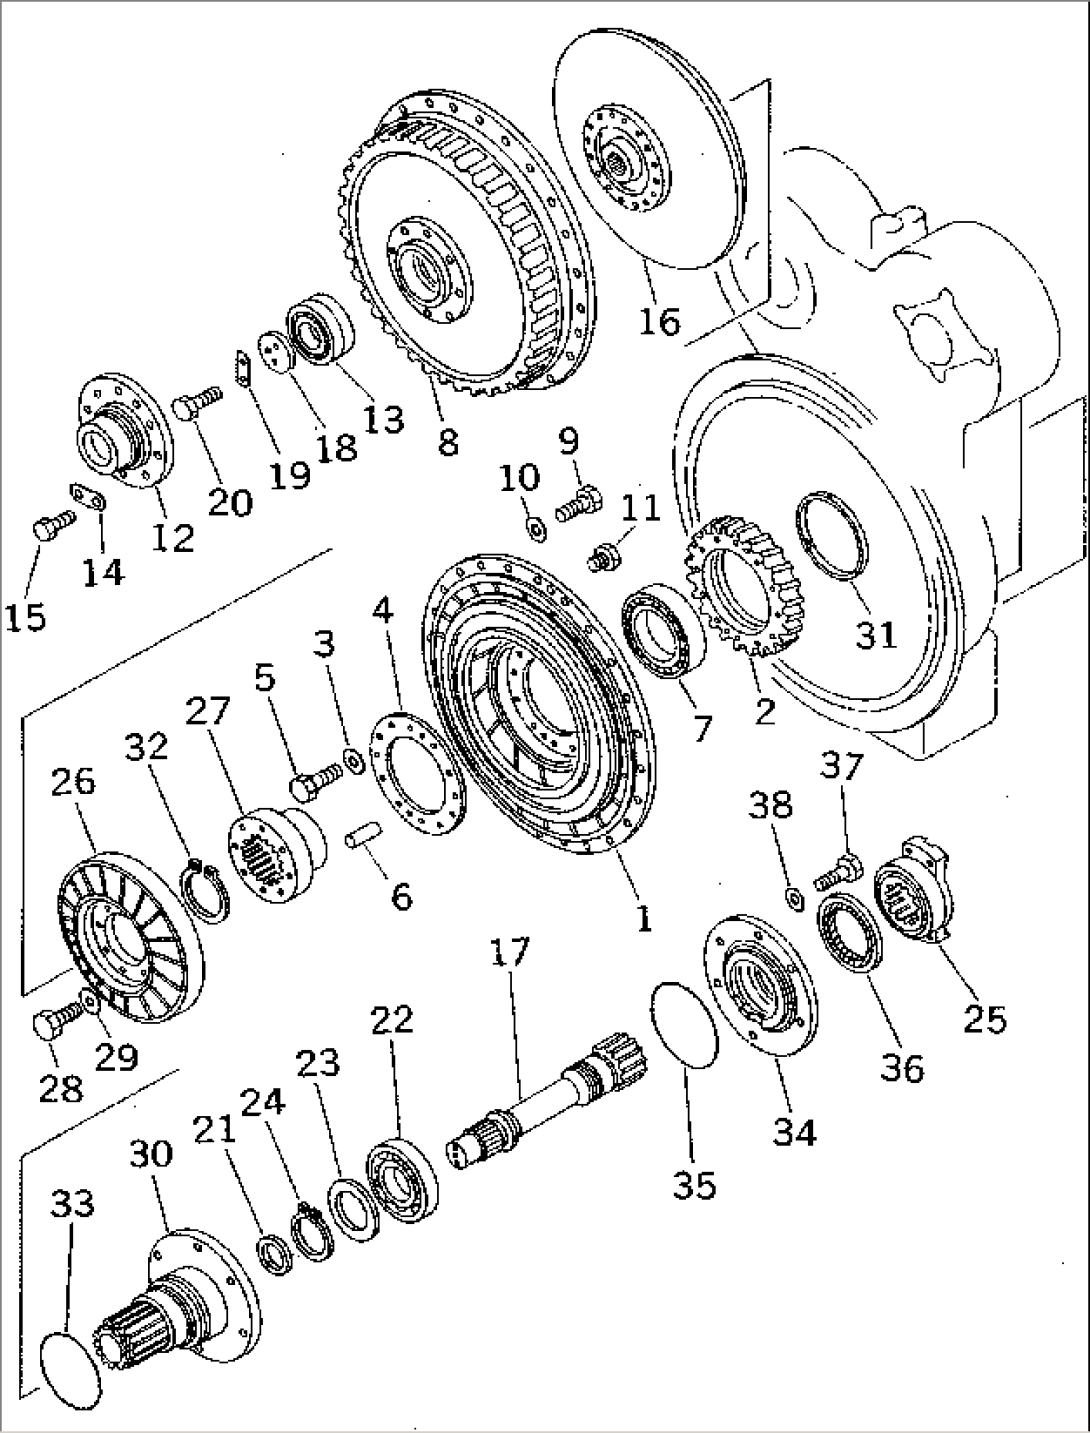 TURBIN AND STATOR (NOISE SUPPRESSION FOR EC)(#15908-16500)